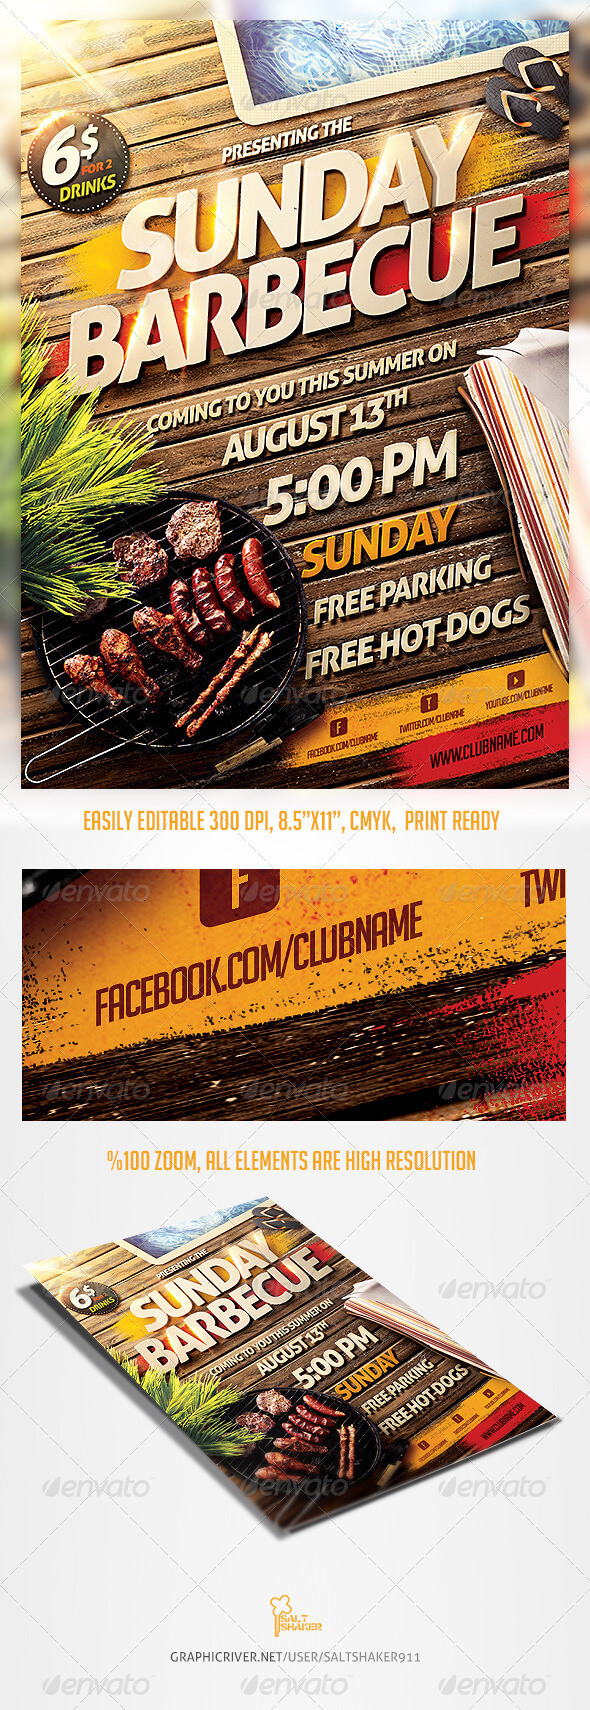 Bbq Graphics, Designs & Templates From Graphicriver Regarding Bbq Fundraiser Flyer Template